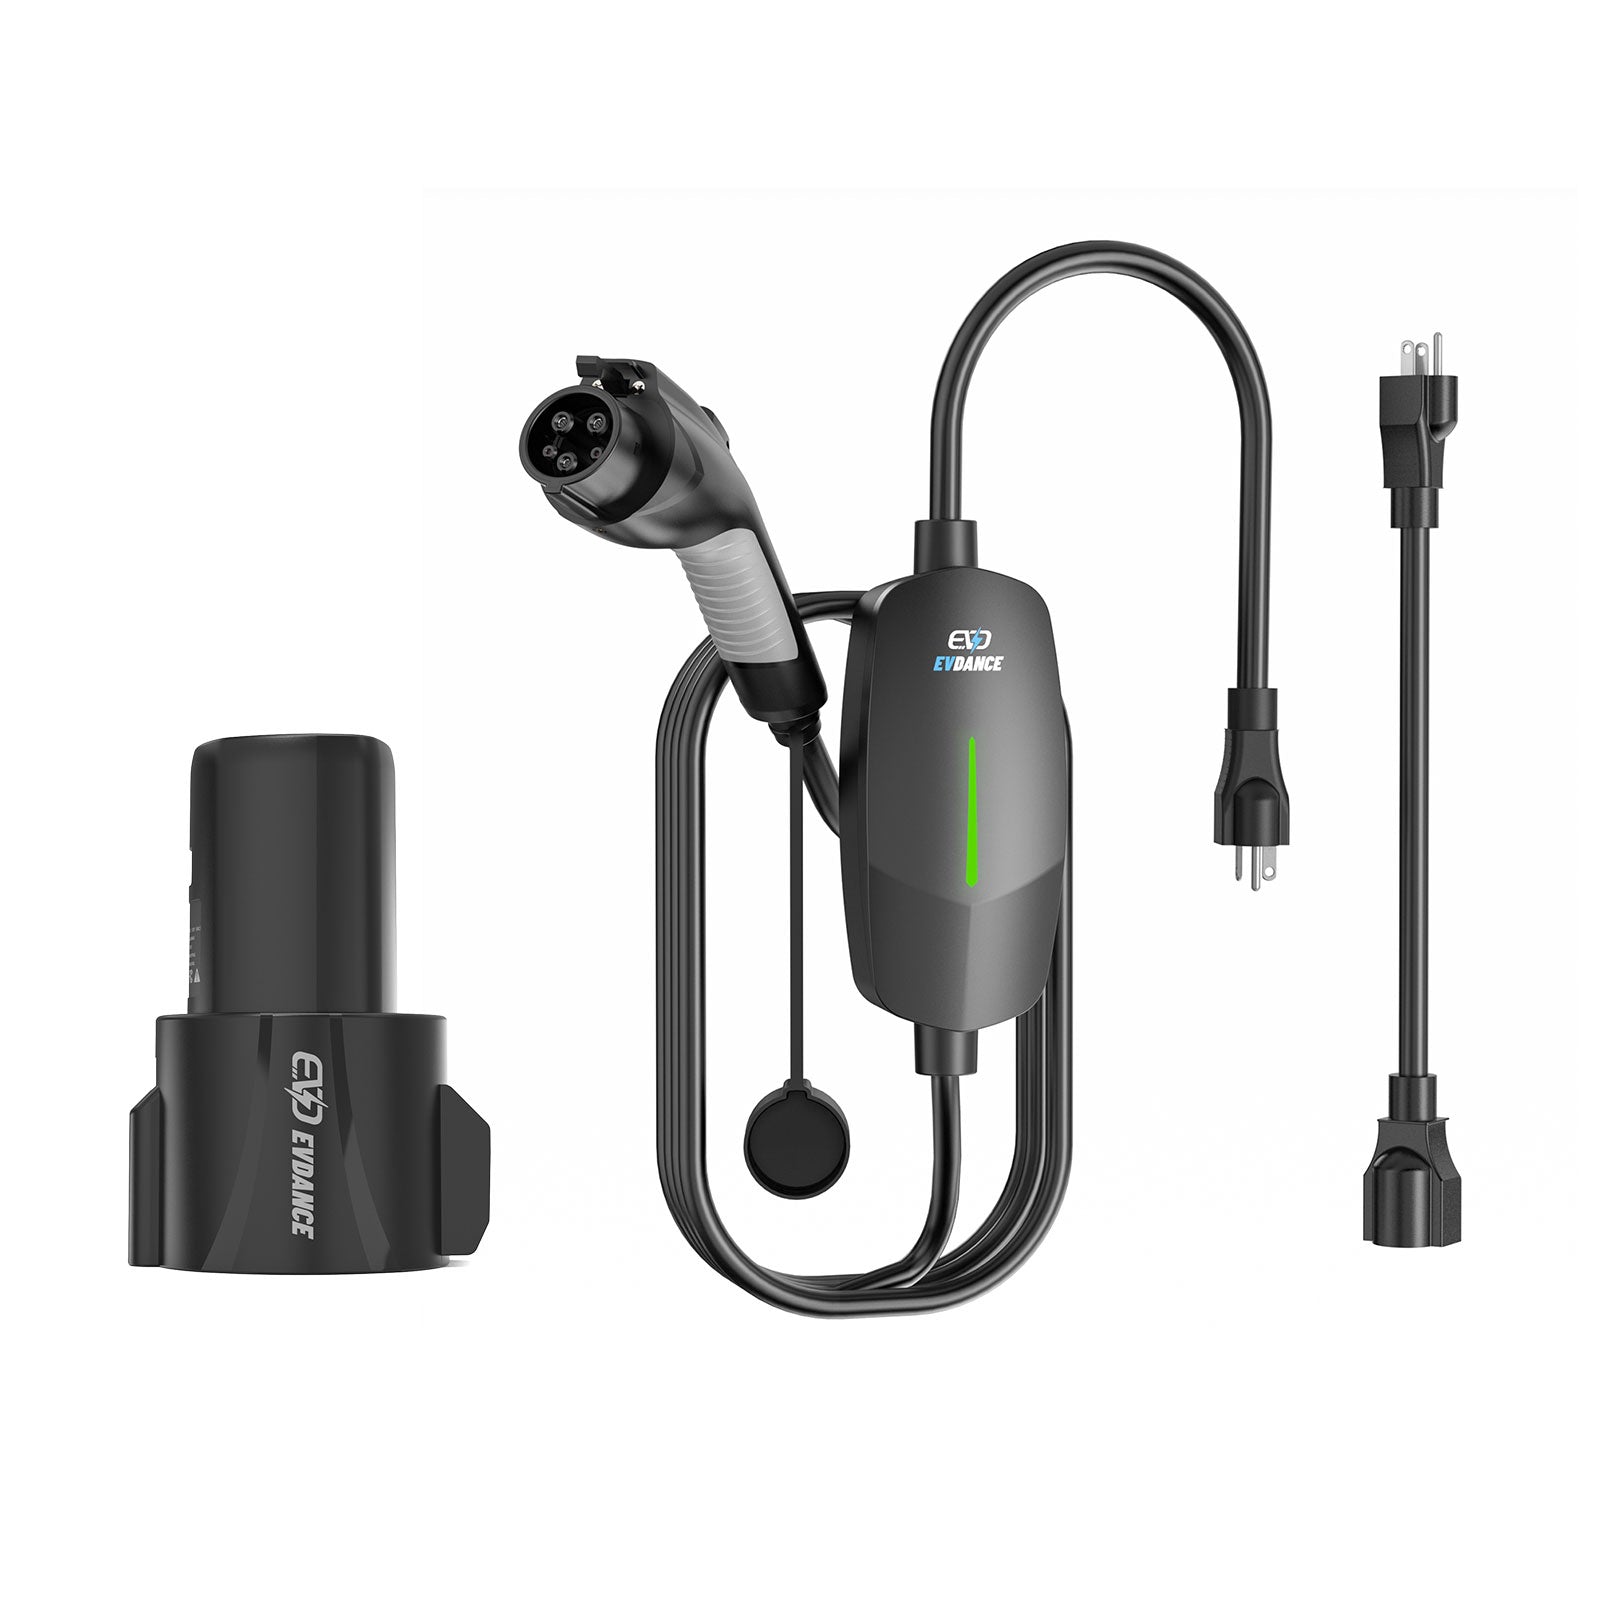 J1772 to Tesla Charging Connector - EV Chargers USA